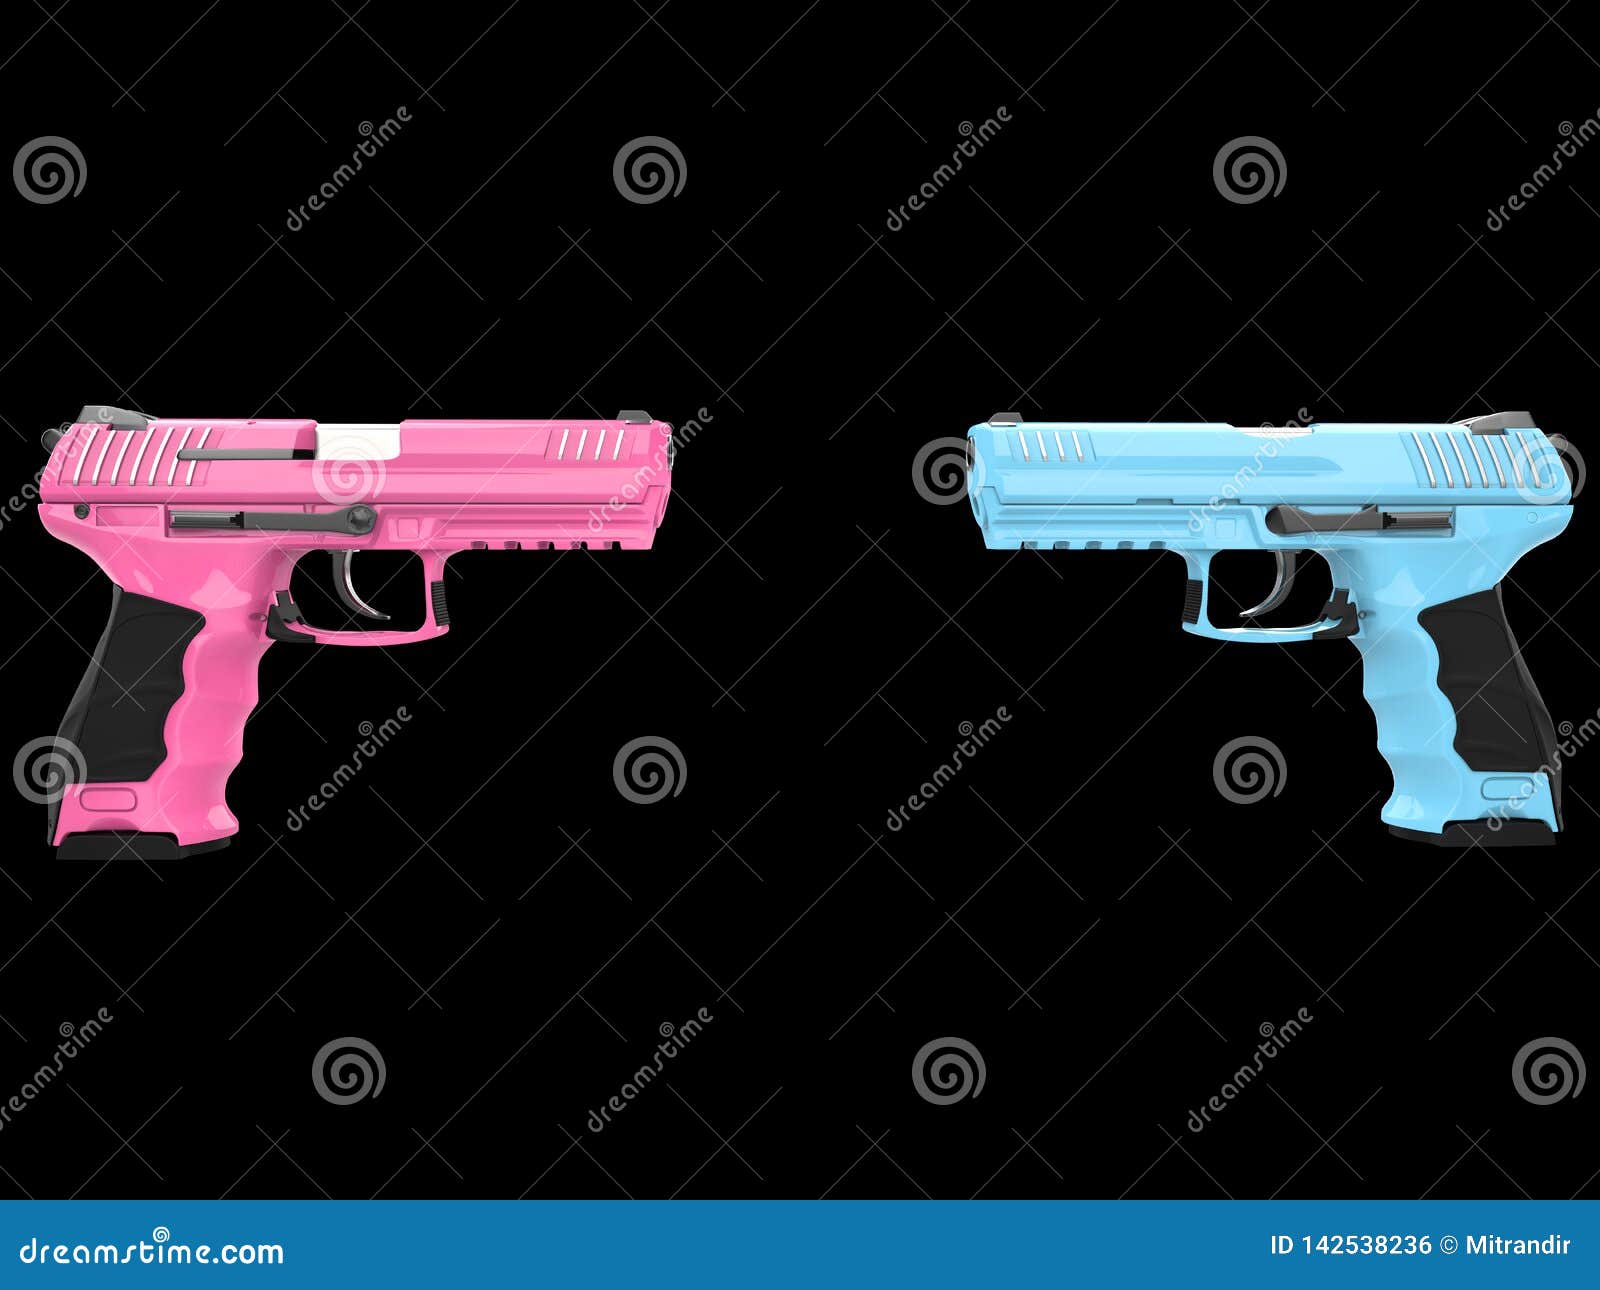 pink and blue semi auto handguns - face to face